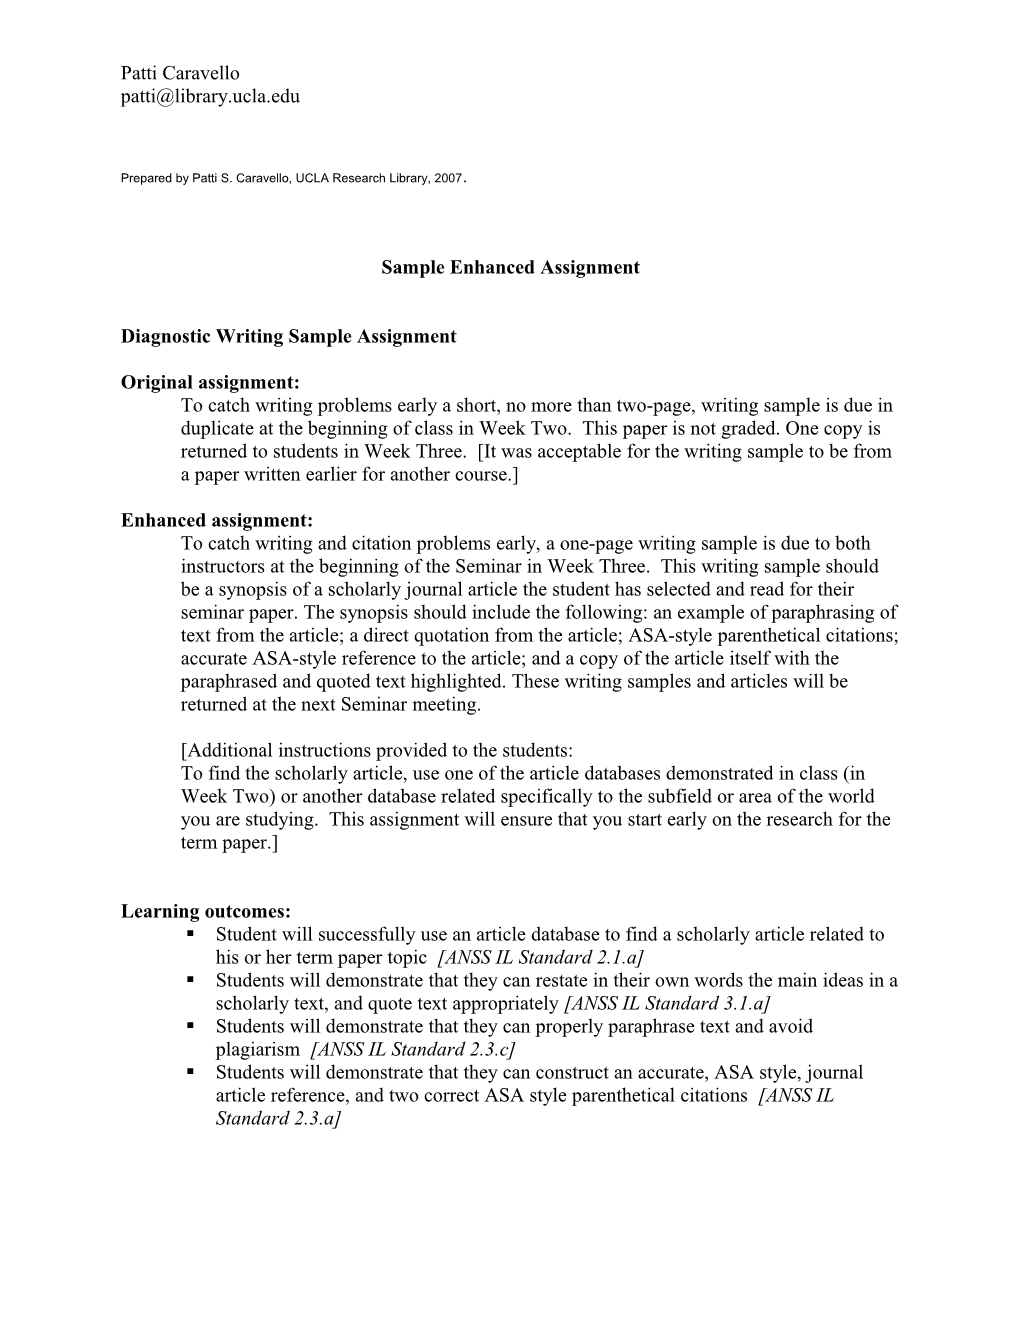 Diagnostic Writing Sample Assignment